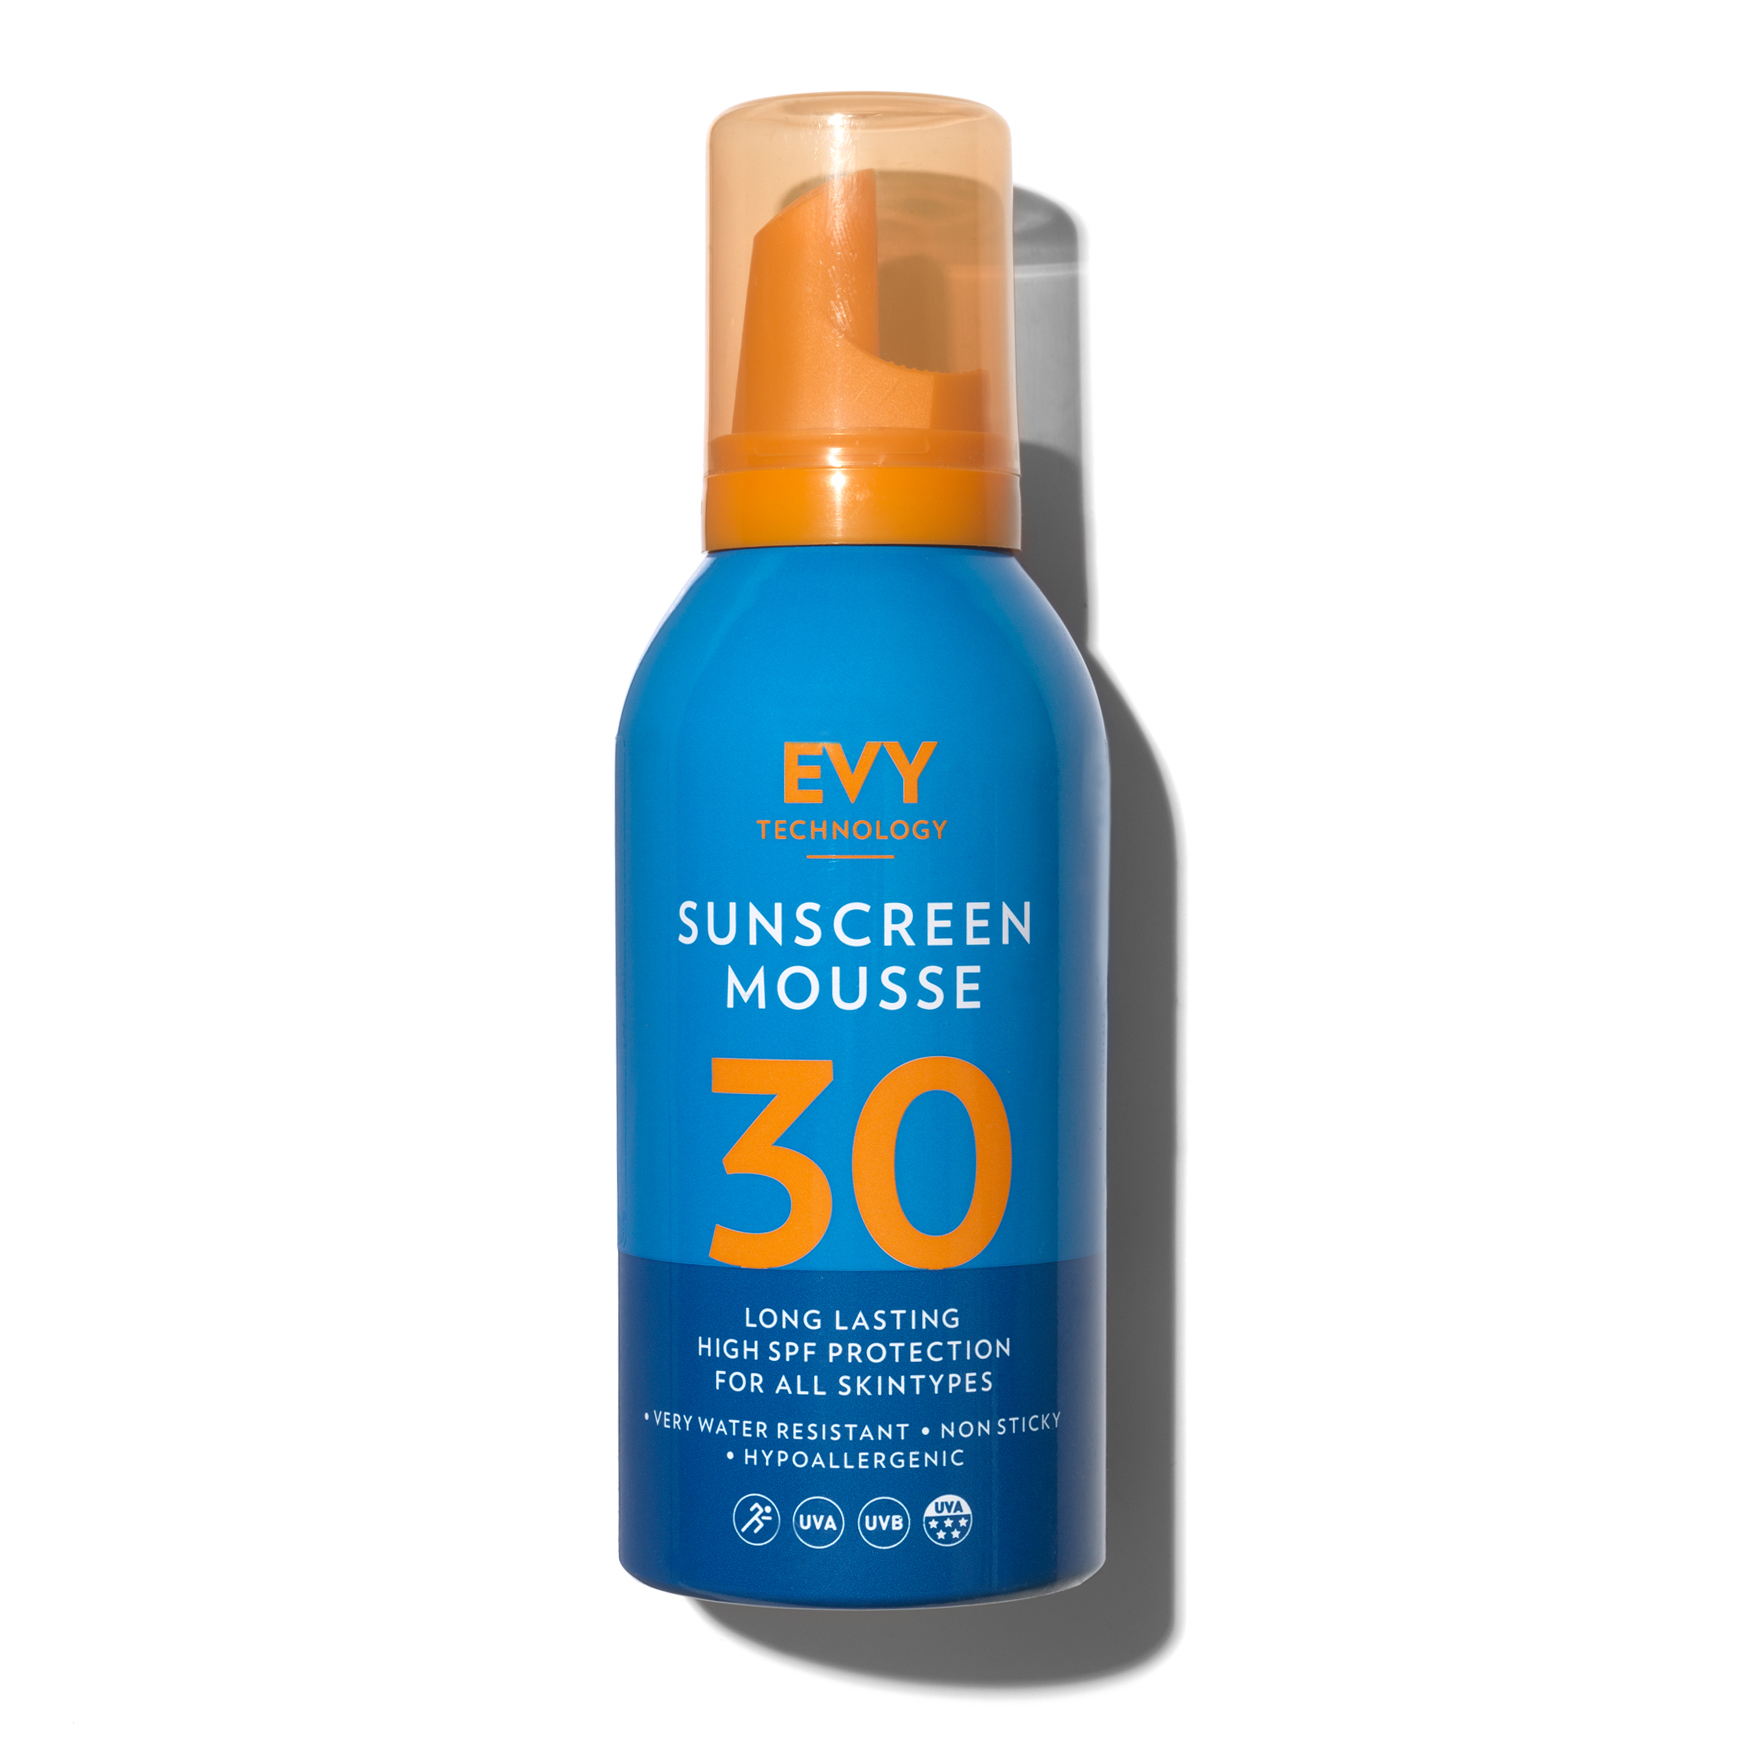 Evy Technology Sunscreen Mousse SPF30 - Space.NK - GBP